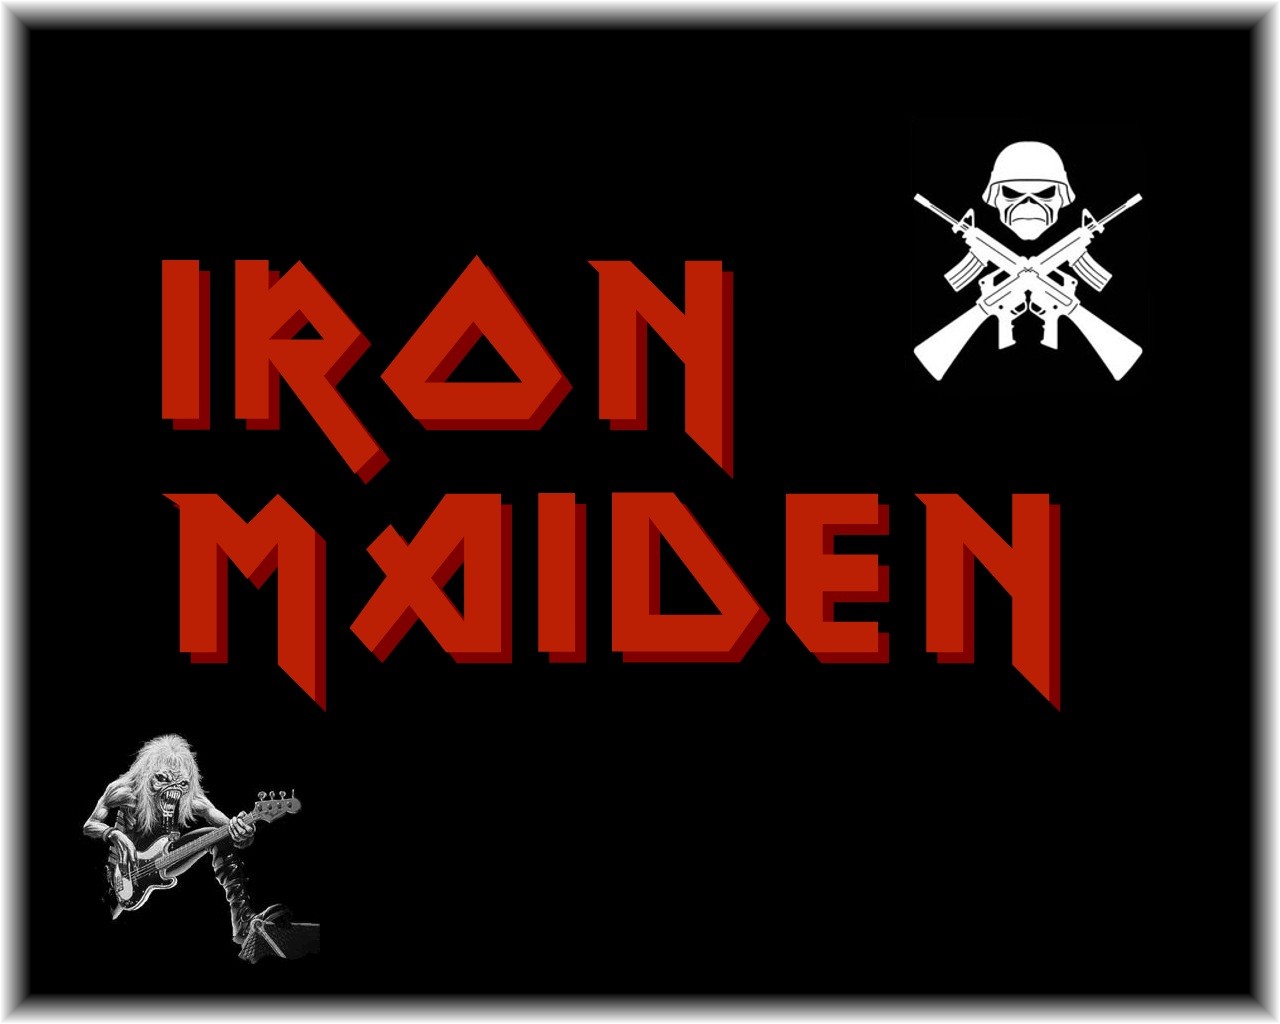 You are viewing the Iron Maiden wallpaper named 